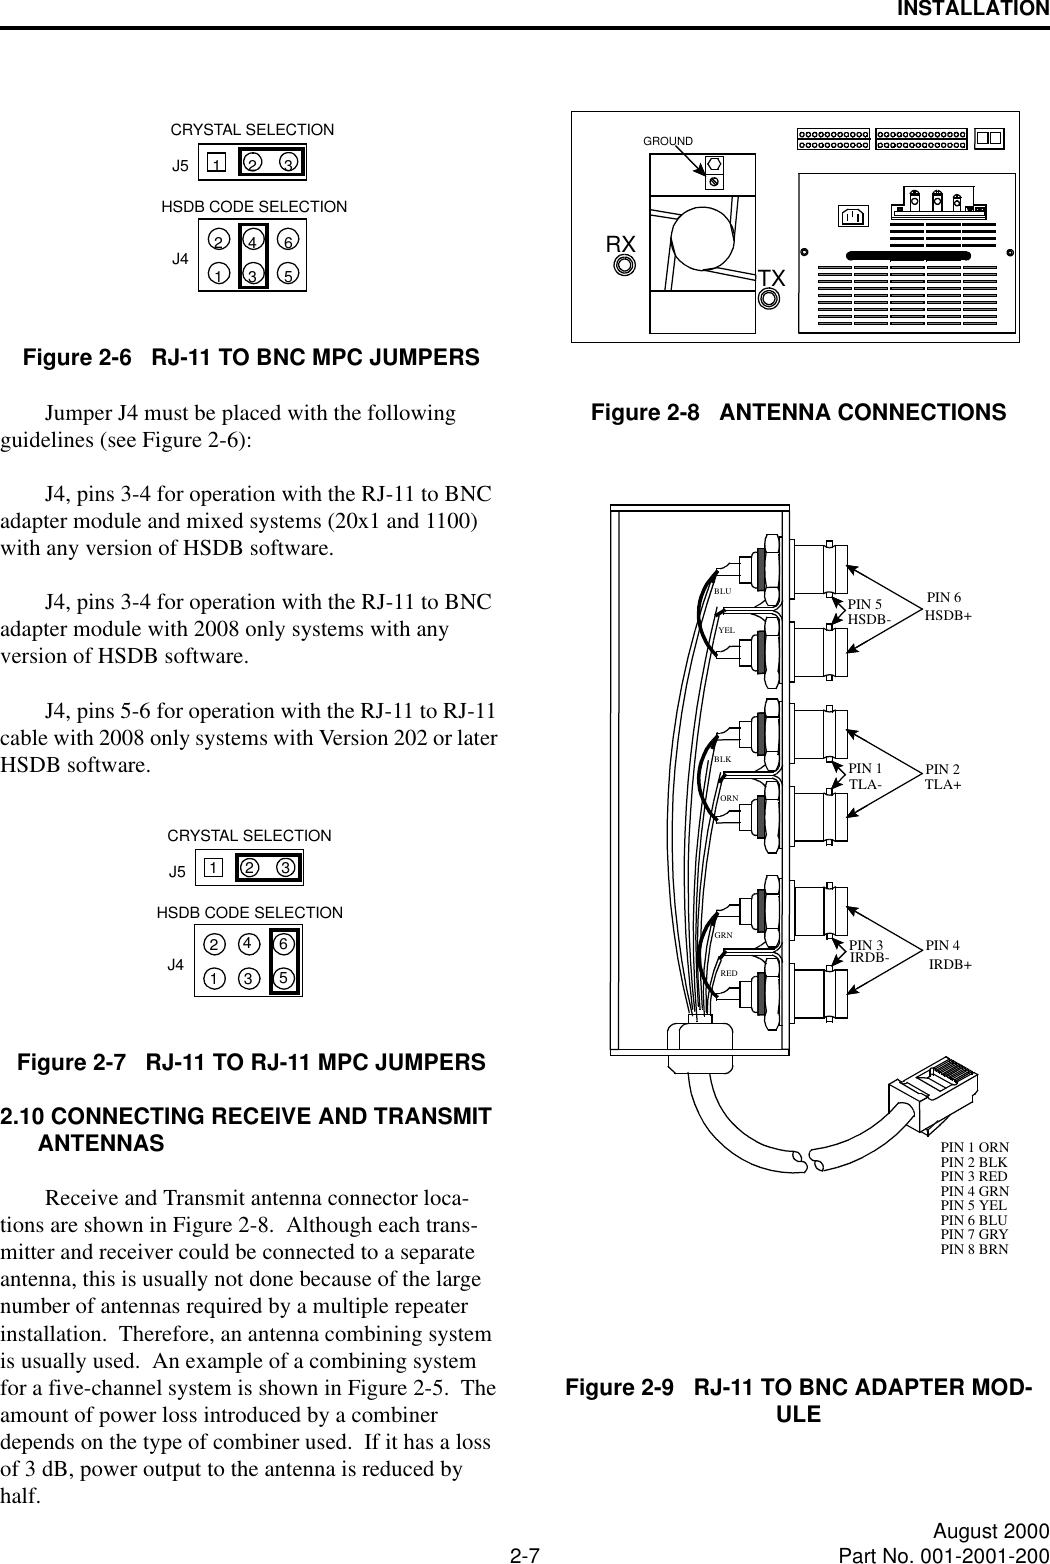 INSTALLATION2-7 August 2000Part No. 001-2001-200Figure 2-6   RJ-11 TO BNC MPC JUMPERSJumper J4 must be placed with the following guidelines (see Figure 2-6):J4, pins 3-4 for operation with the RJ-11 to BNC adapter module and mixed systems (20x1 and 1100) with any version of HSDB software.J4, pins 3-4 for operation with the RJ-11 to BNC adapter module with 2008 only systems with any version of HSDB software.J4, pins 5-6 for operation with the RJ-11 to RJ-11 cable with 2008 only systems with Version 202 or later HSDB software.Figure 2-7   RJ-11 TO RJ-11 MPC JUMPERS2.10 CONNECTING RECEIVE AND TRANSMIT ANTENNASReceive and Transmit antenna connector loca-tions are shown in Figure 2-8.  Although each trans-mitter and receiver could be connected to a separate antenna, this is usually not done because of the large number of antennas required by a multiple repeater installation.  Therefore, an antenna combining system is usually used.  An example of a combining system for a five-channel system is shown in Figure 2-5.  The amount of power loss introduced by a combiner depends on the type of combiner used.  If it has a loss of 3 dB, power output to the antenna is reduced by half.Figure 2-8   ANTENNA CONNECTIONSFigure 2-9   RJ-11 TO BNC ADAPTER MOD-ULE231J5J4 123465HSDB CODE SELECTIONCRYSTAL SELECTION231J5J4 123465HSDB CODE SELECTIONCRYSTAL SELECTIONTXRXGROUNDORNPIN 2TLA+PIN 1TLA-GRNBLKHSDB-PIN 5 HSDB+PIN 6YELBLUPIN 1 ORNPIN 4PIN 3REDIRDB- IRDB+PIN 2 BLKPIN 3 REDPIN 4 GRNPIN 5 YELPIN 6 BLUPIN 7 GRYPIN 8 BRN